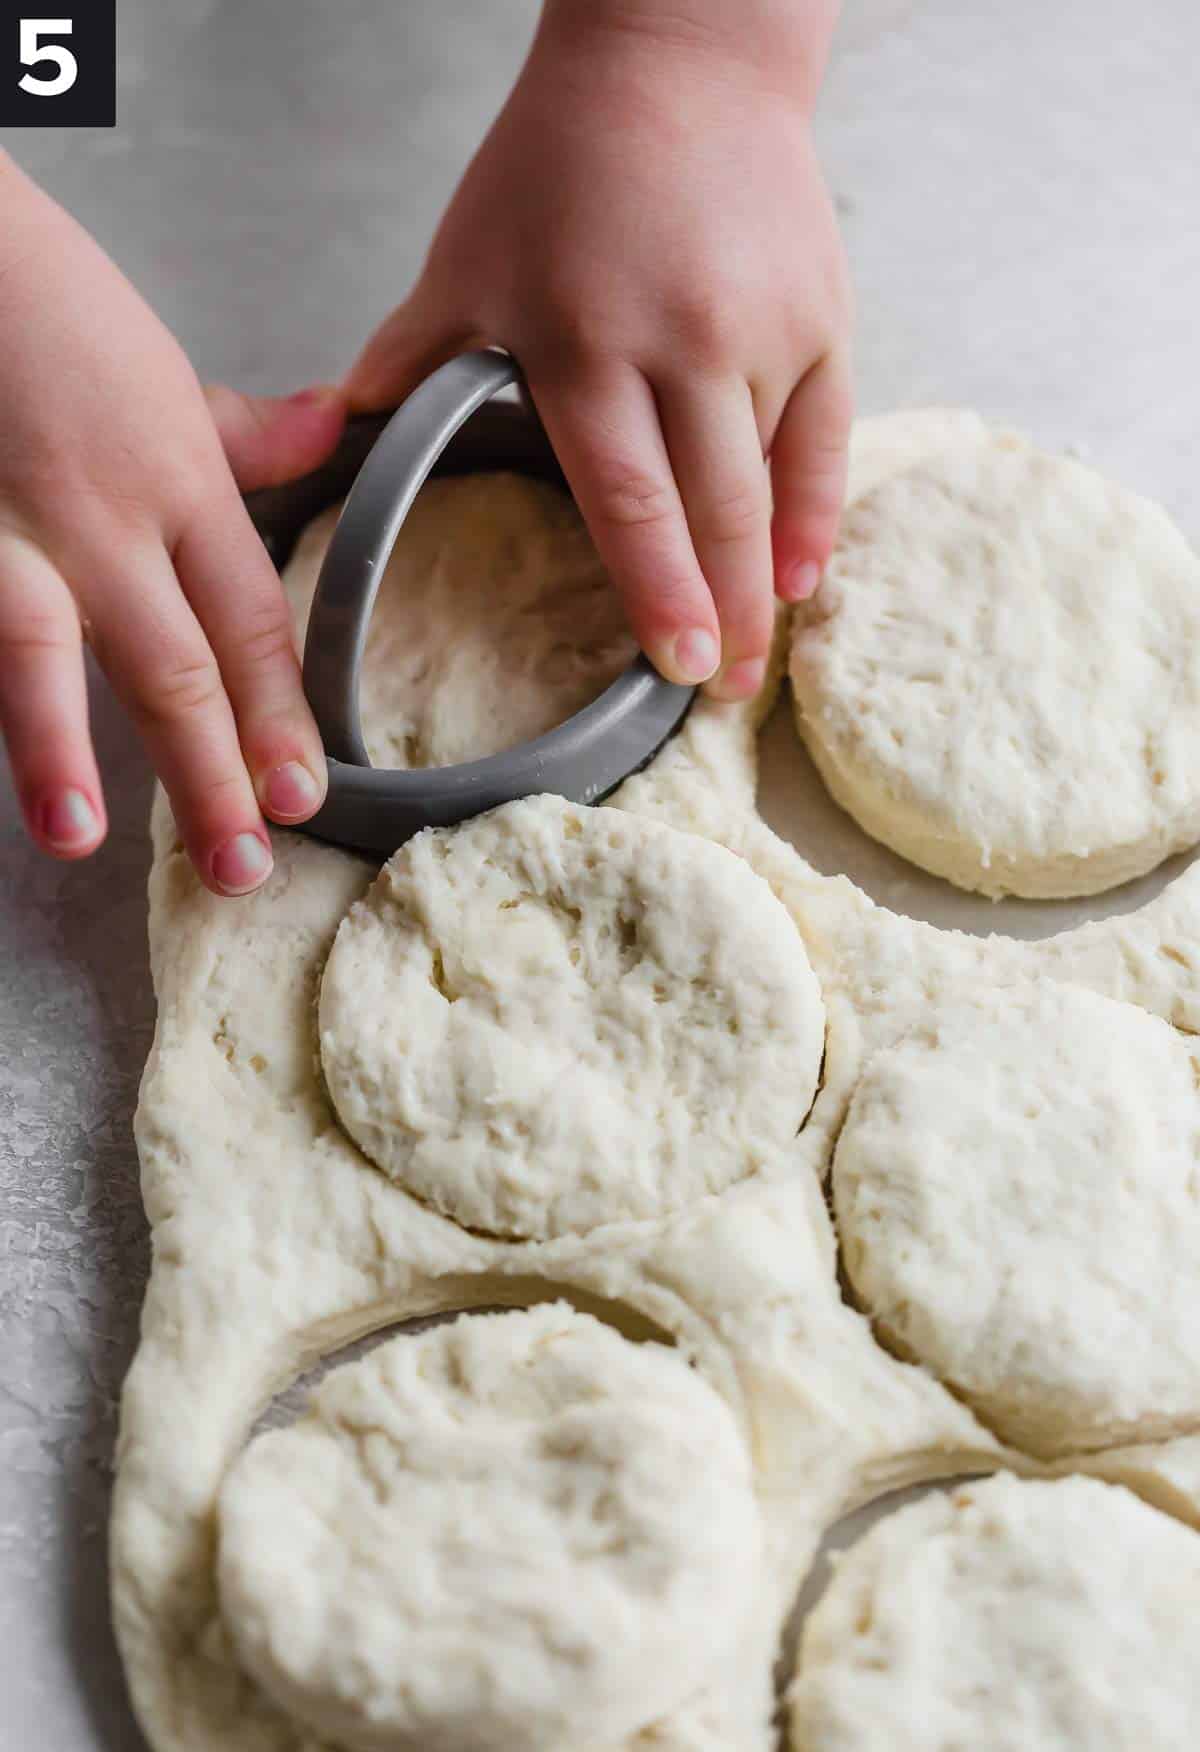 Small hands using a biscuit cutter to cut round biscuits from dough.